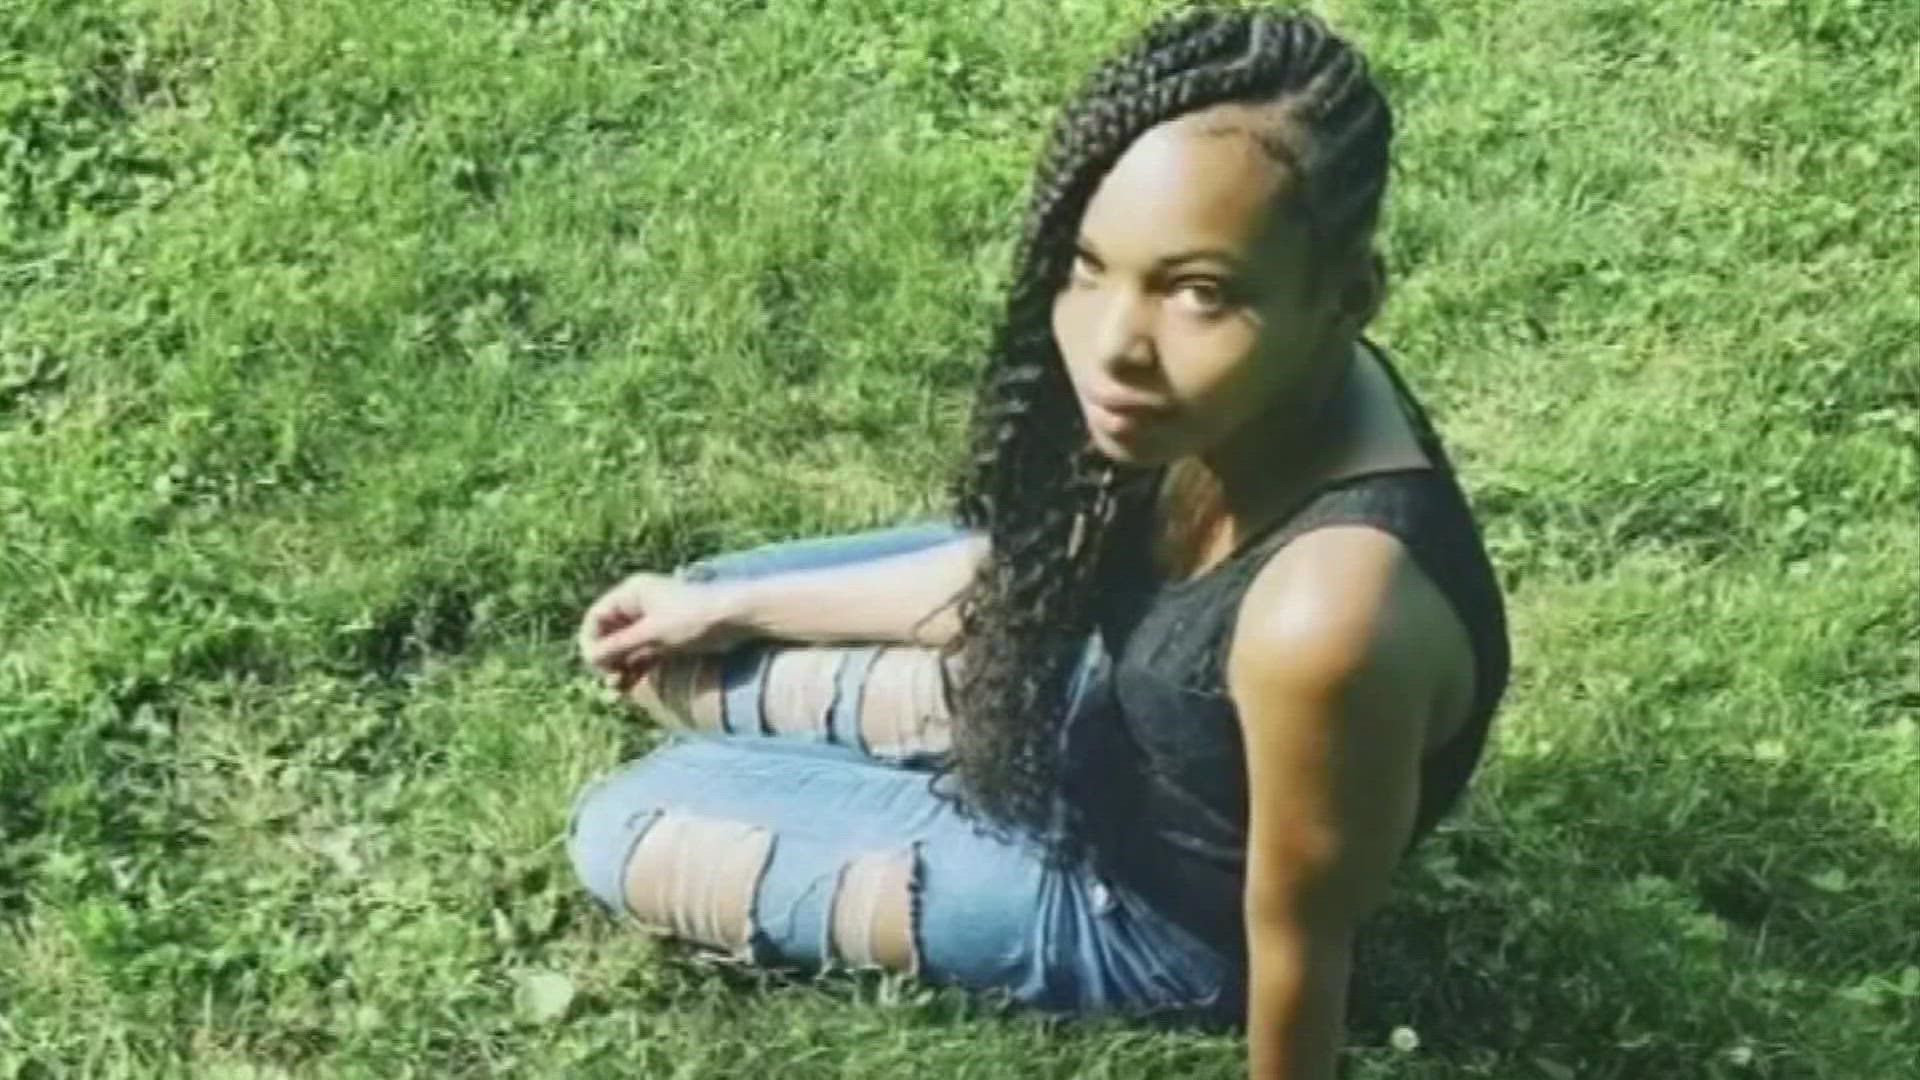 Indiah Corley was shot and killed when she was 14 in 2020. An arrest was made last week, nearly two years after she died.